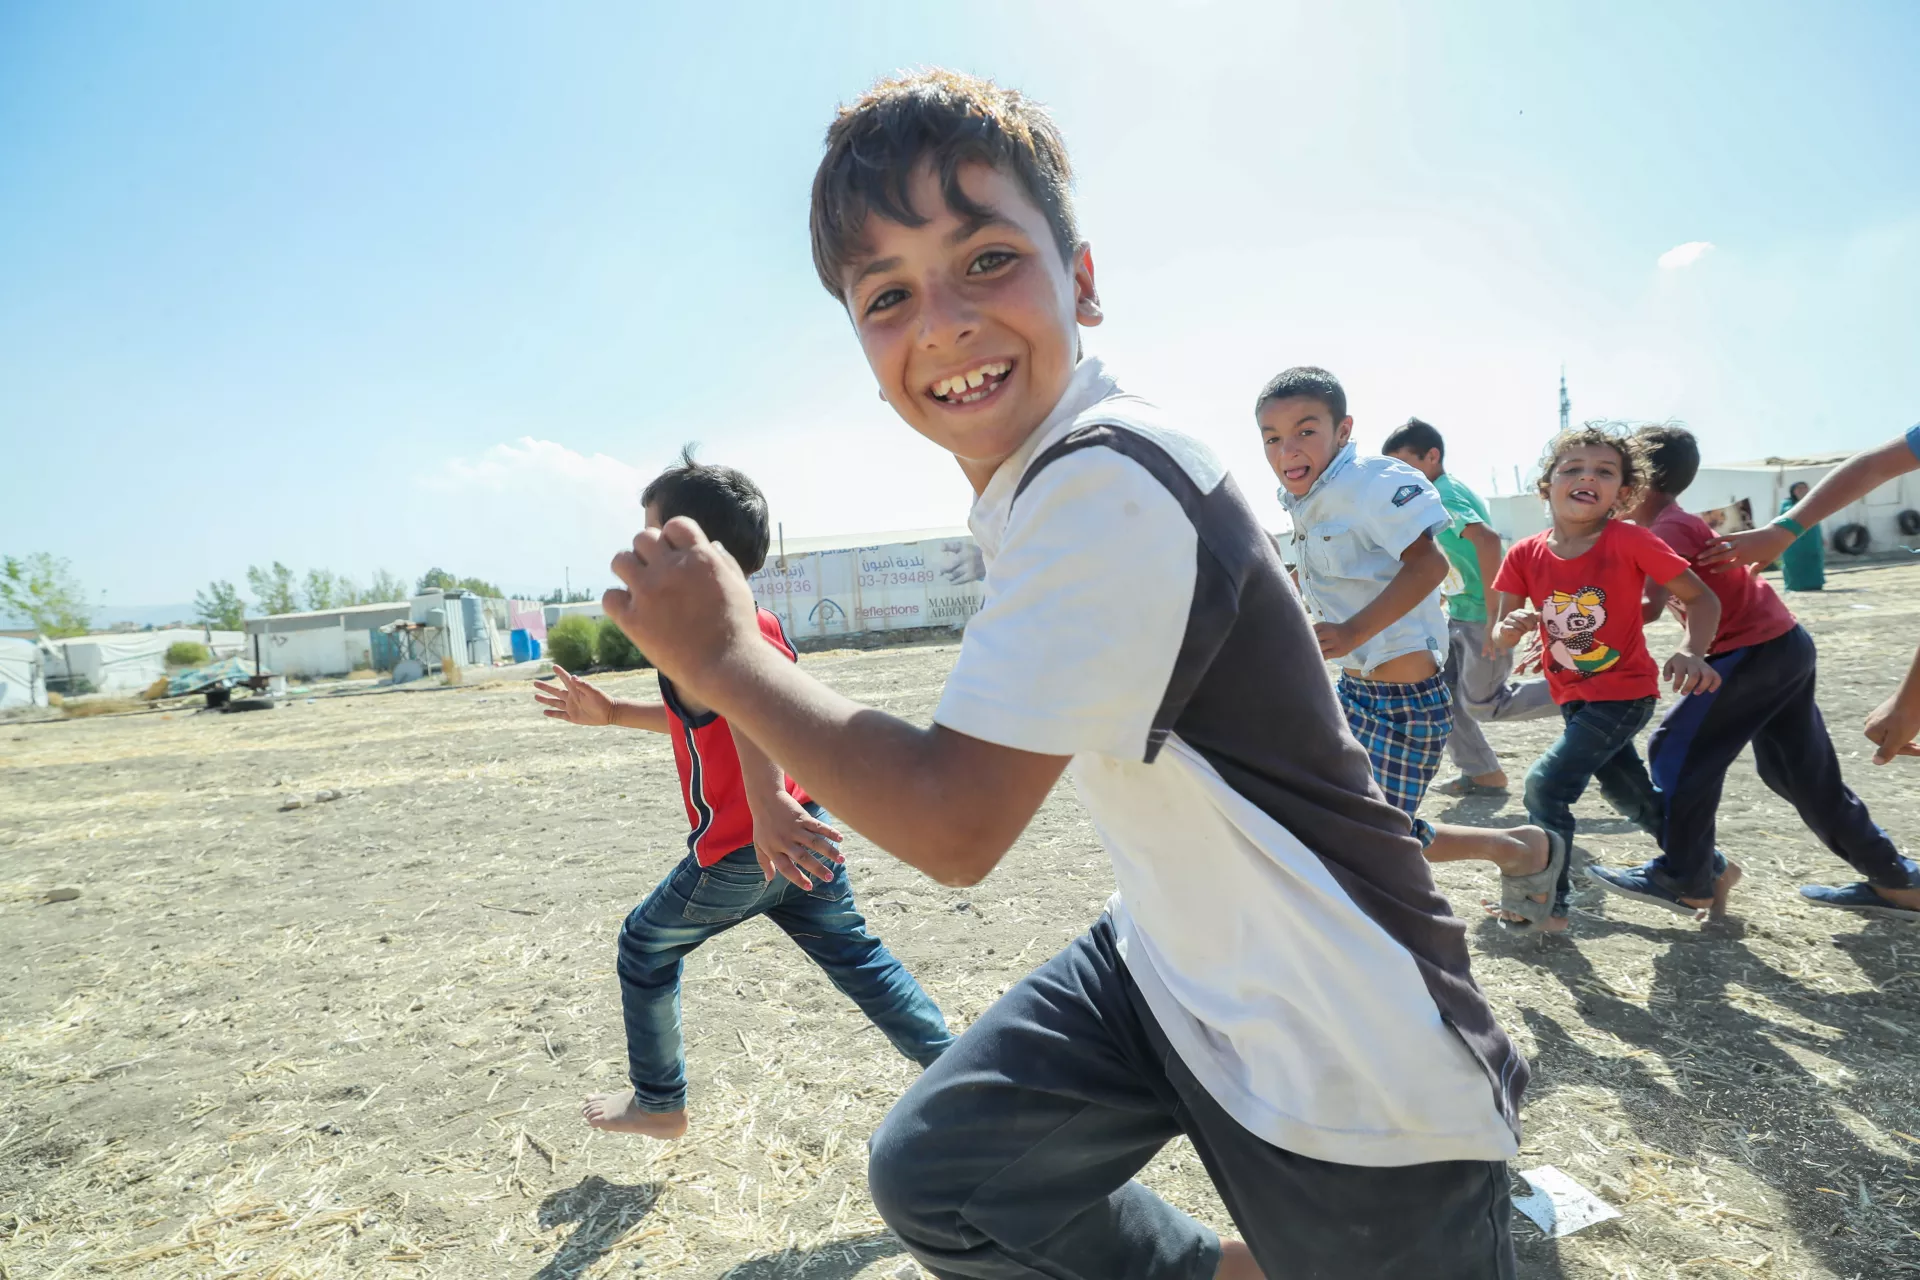 Convention on the Rights of the Child: A group of Syrian refugee children play together in an informal settlement in Lebanon.